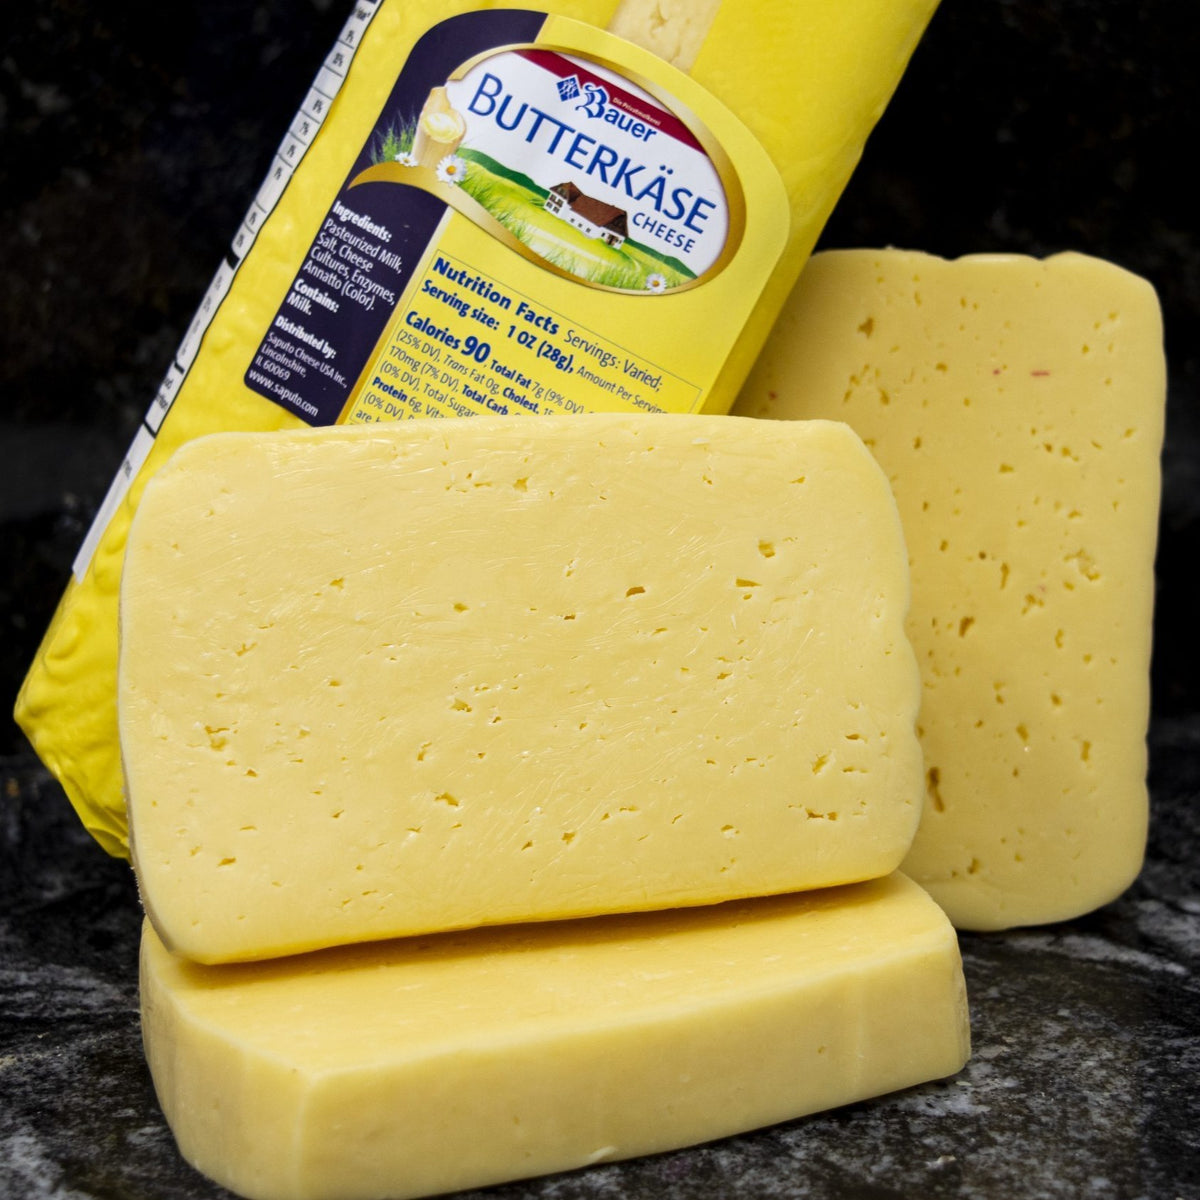 How to Make Butter Cheese (Butterkase) - Homesteaders of America